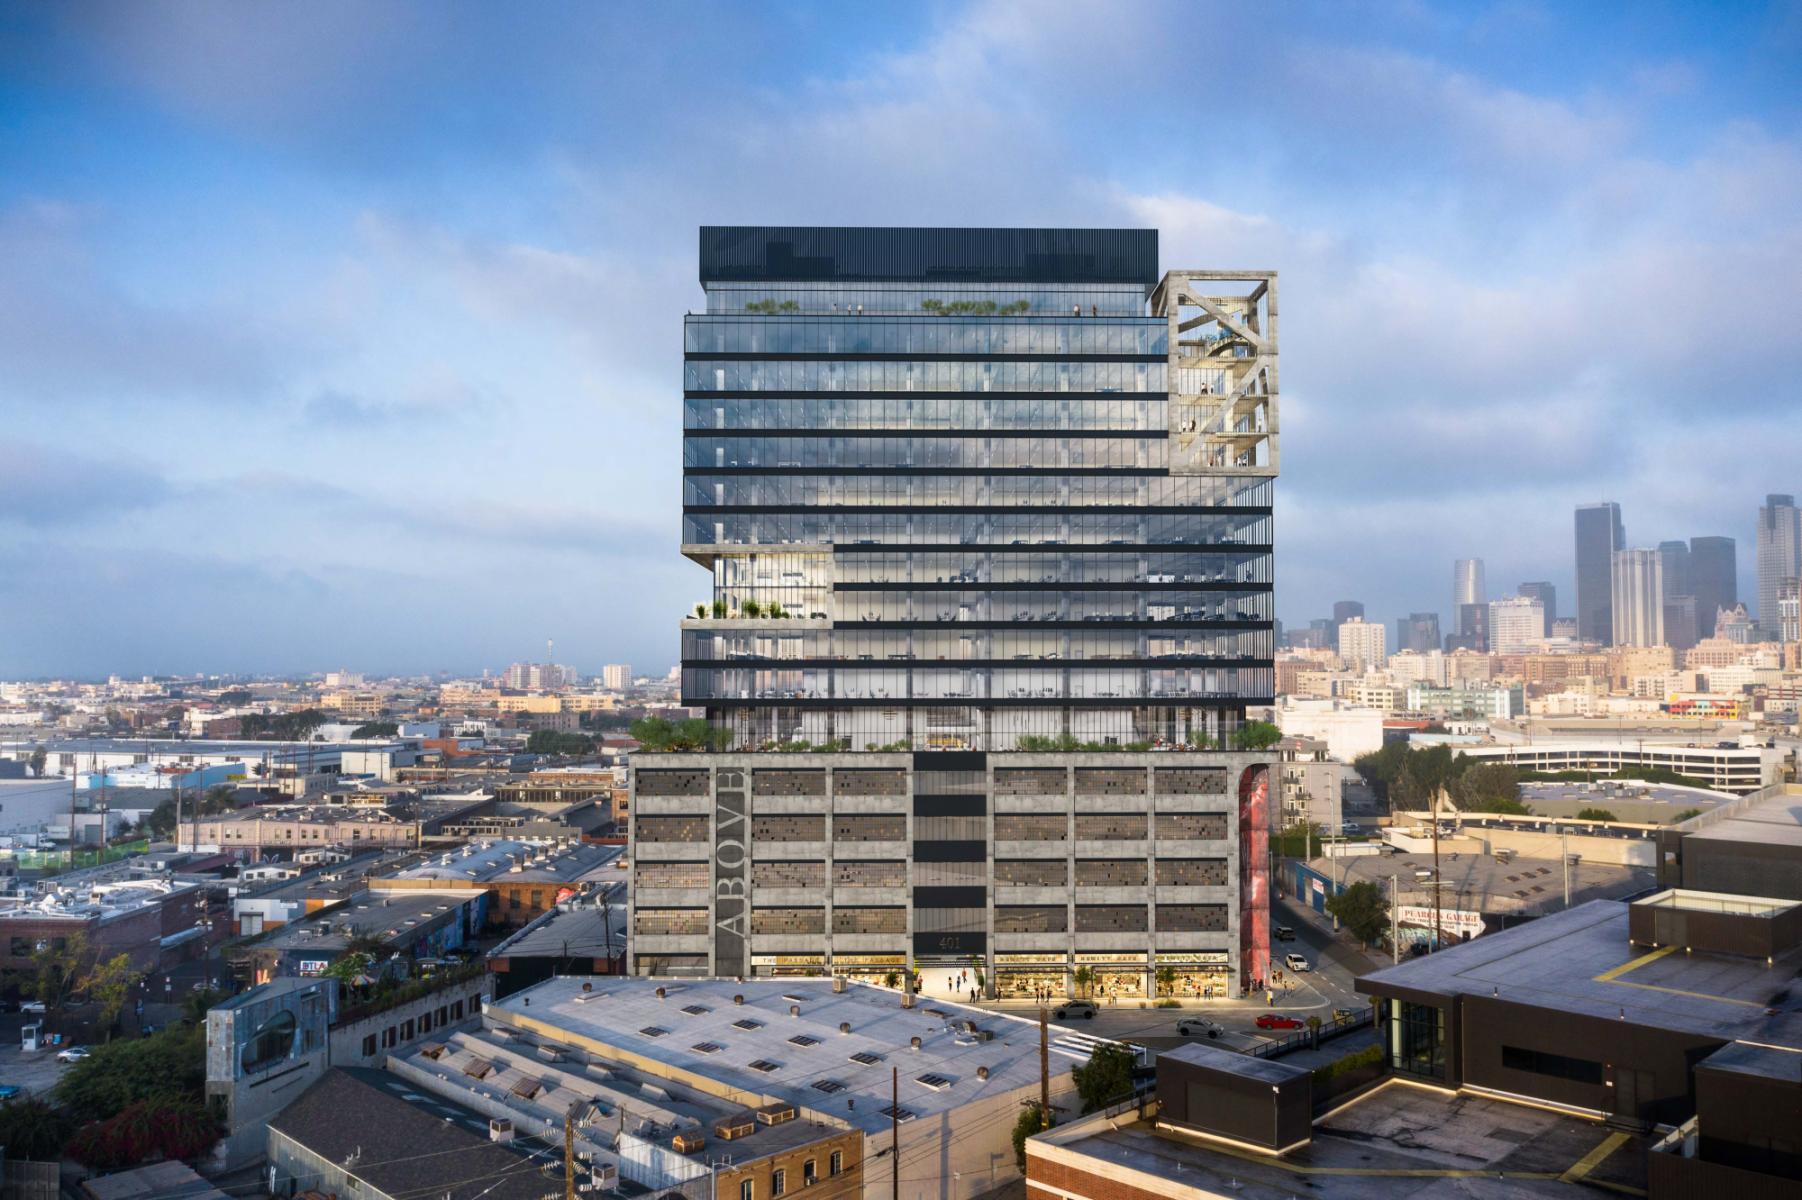 18-story, 340,000SF office building slated for Arts District | Urbanize LA